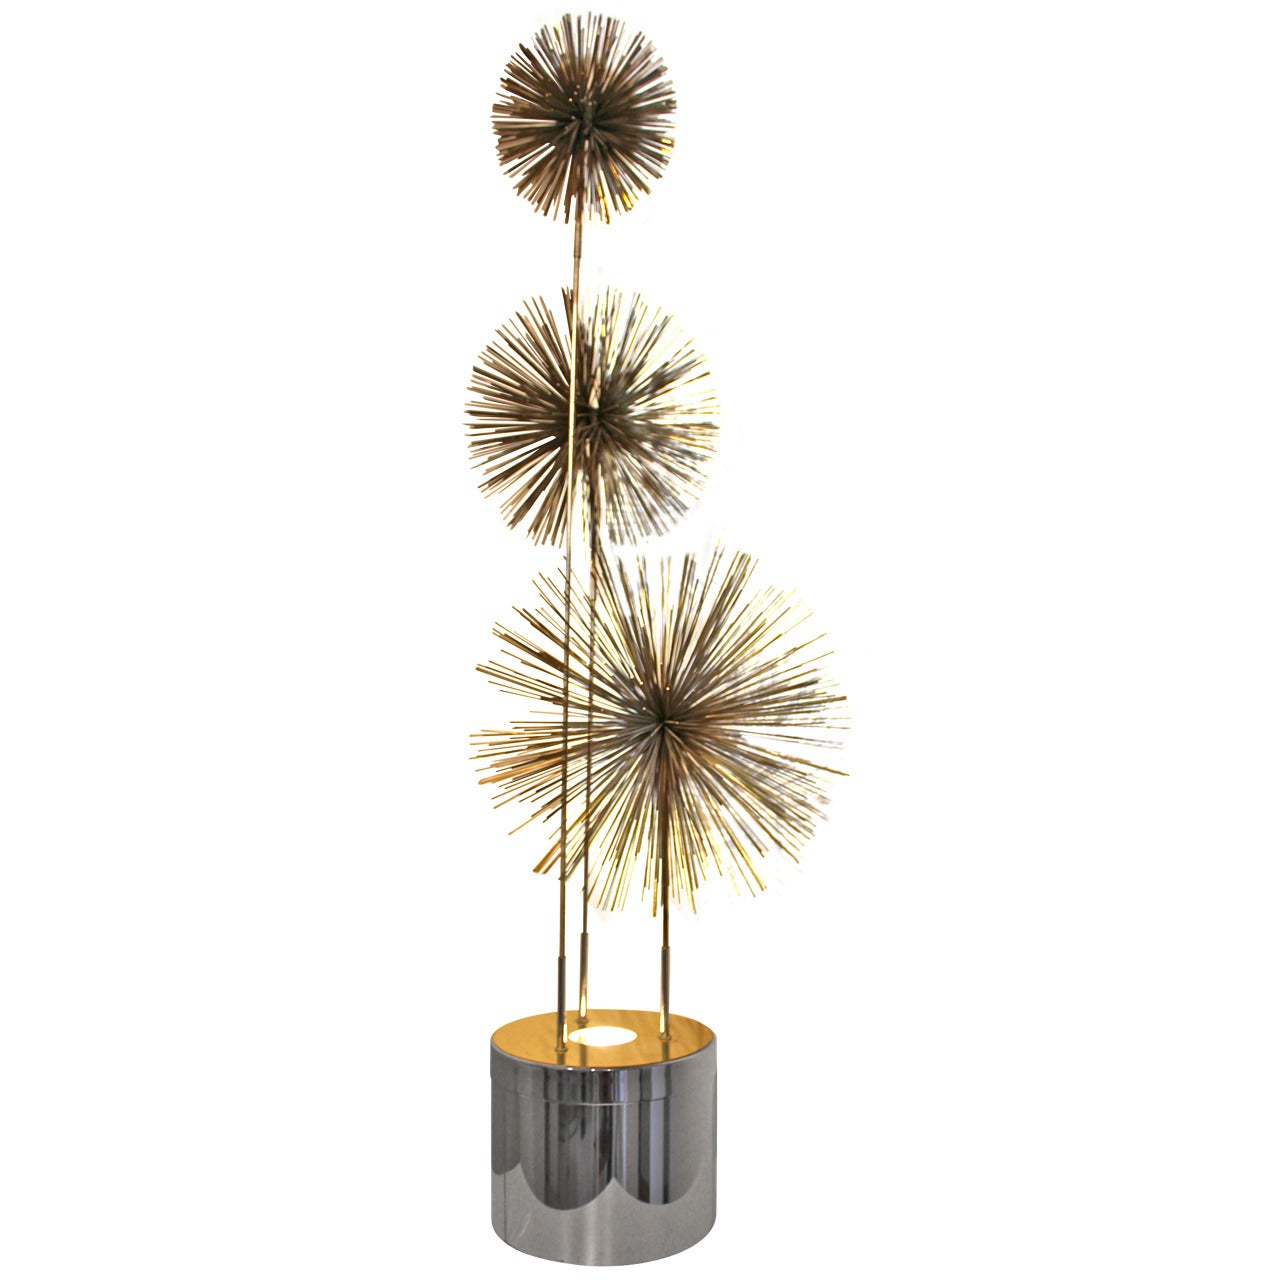 Curtis Jere Pom-Pom Lamp "Urchin Style, " circa 1970 For Sale